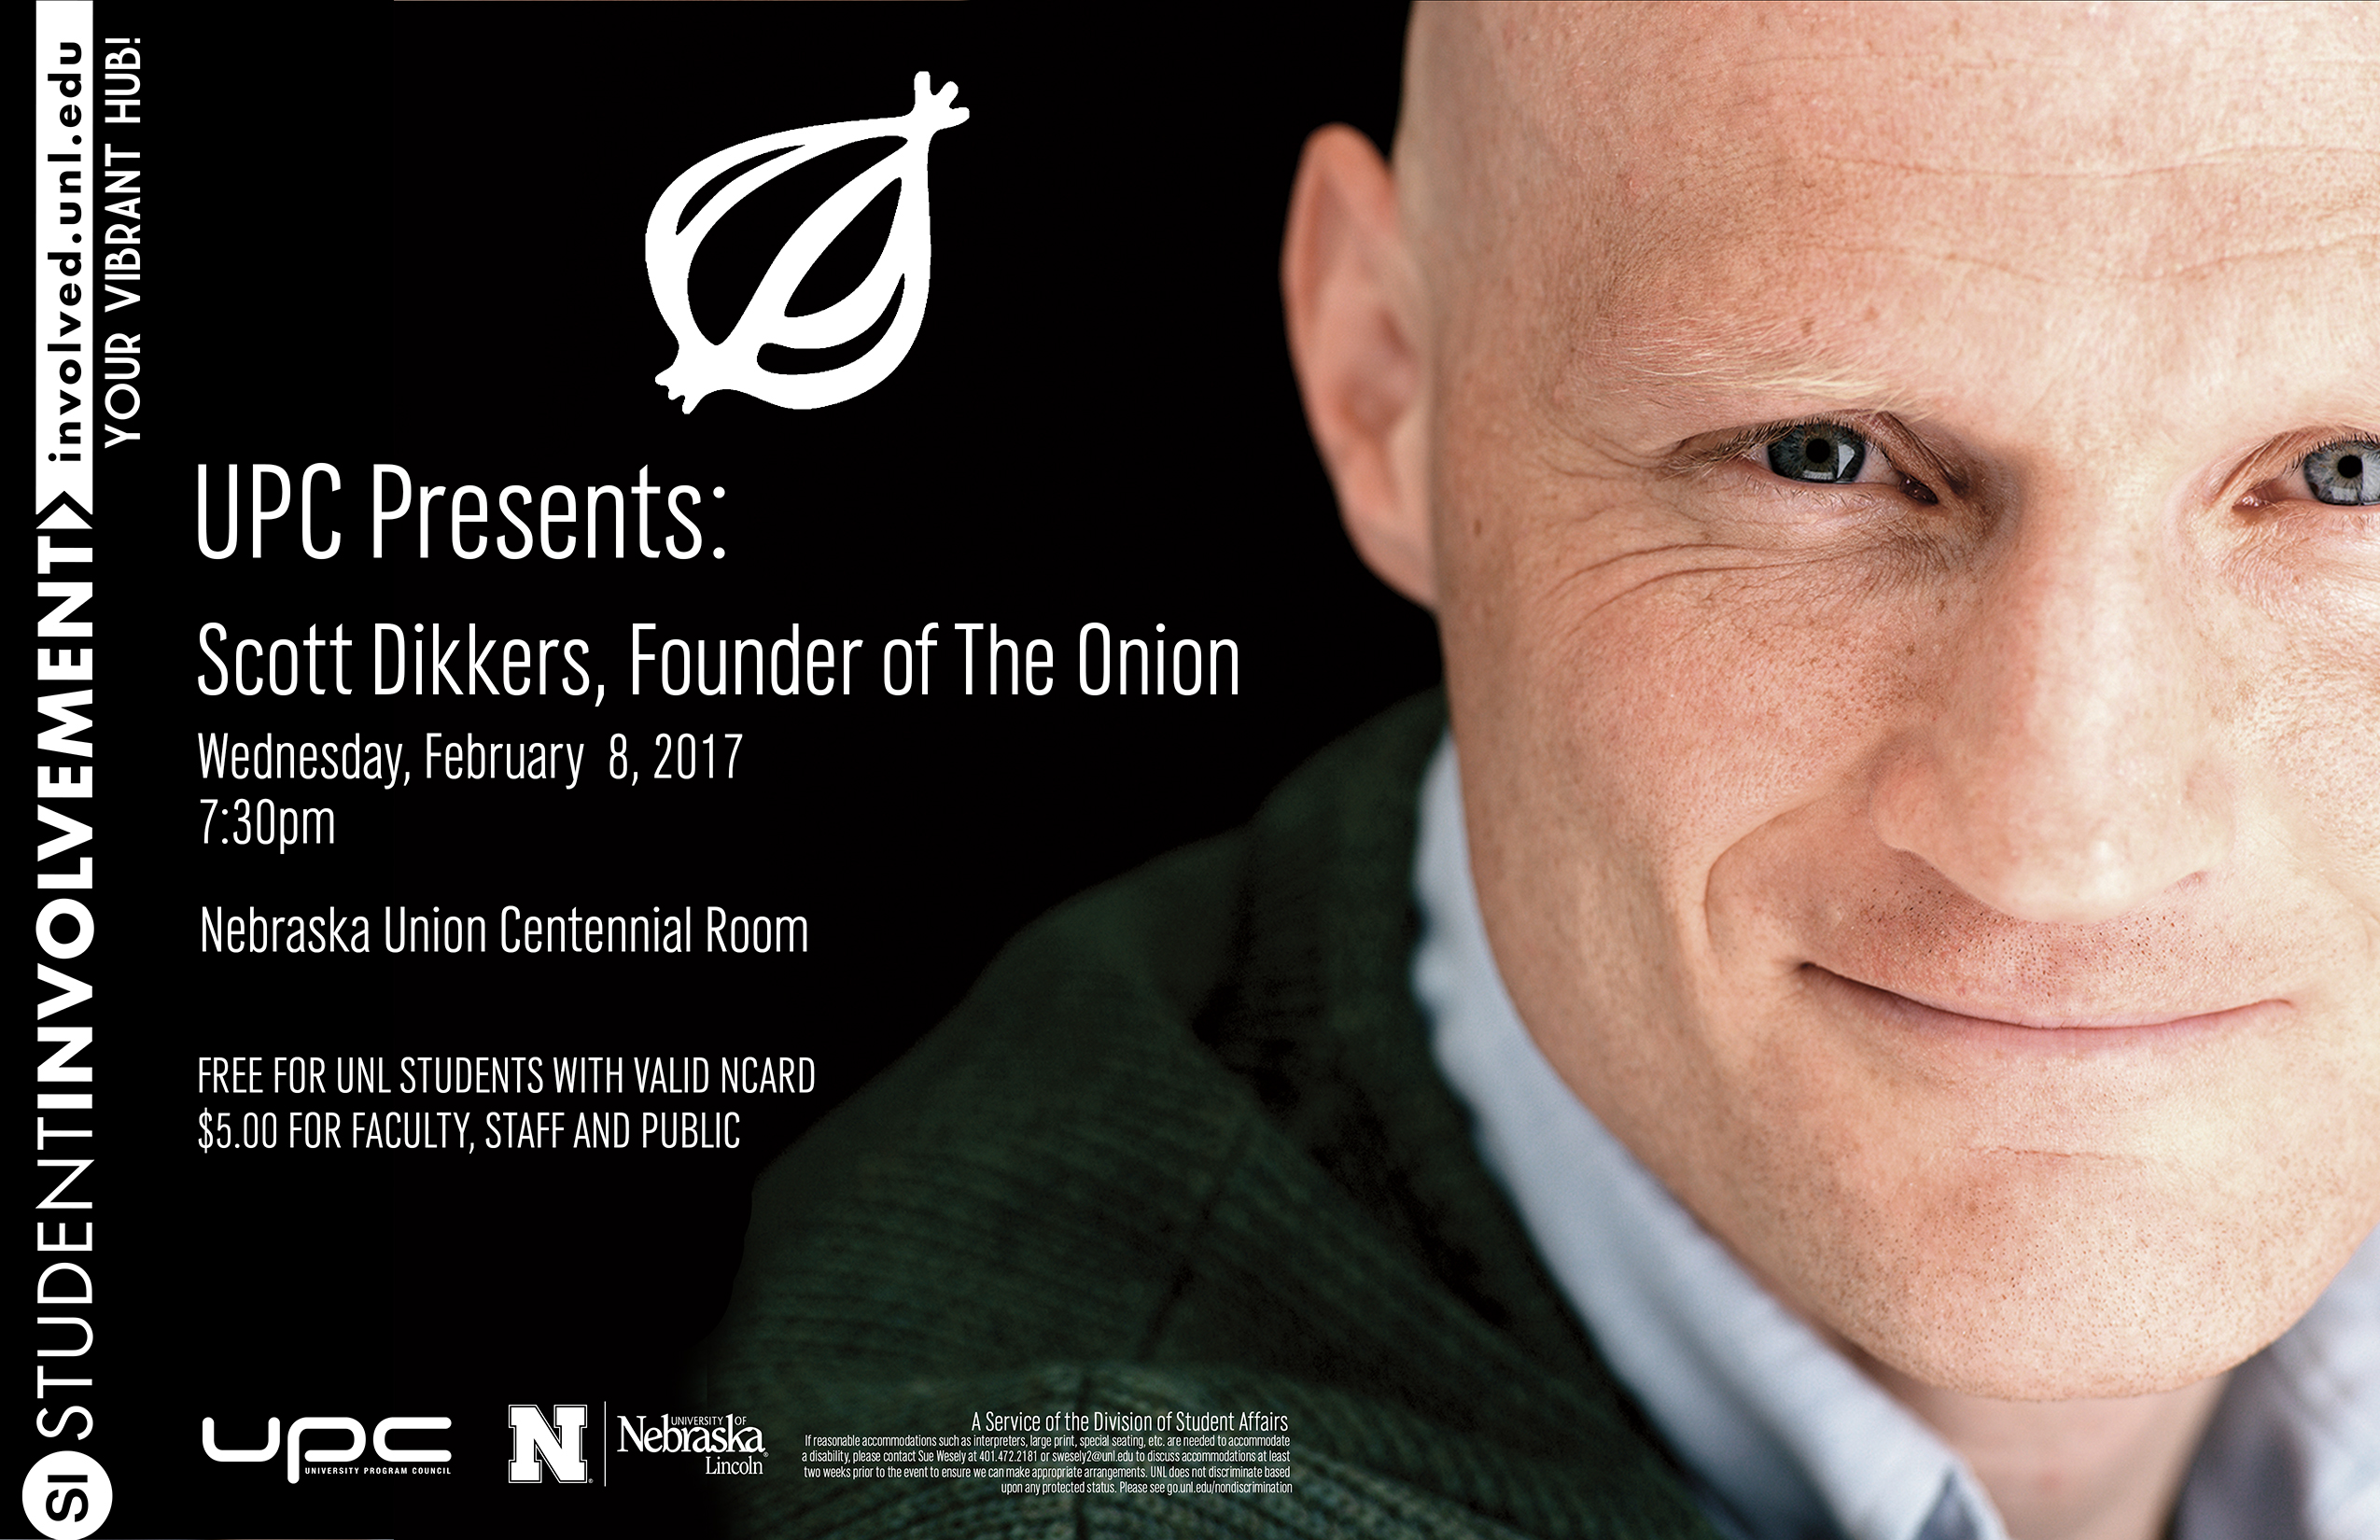 Scott Dikkers, Founder of The Onion